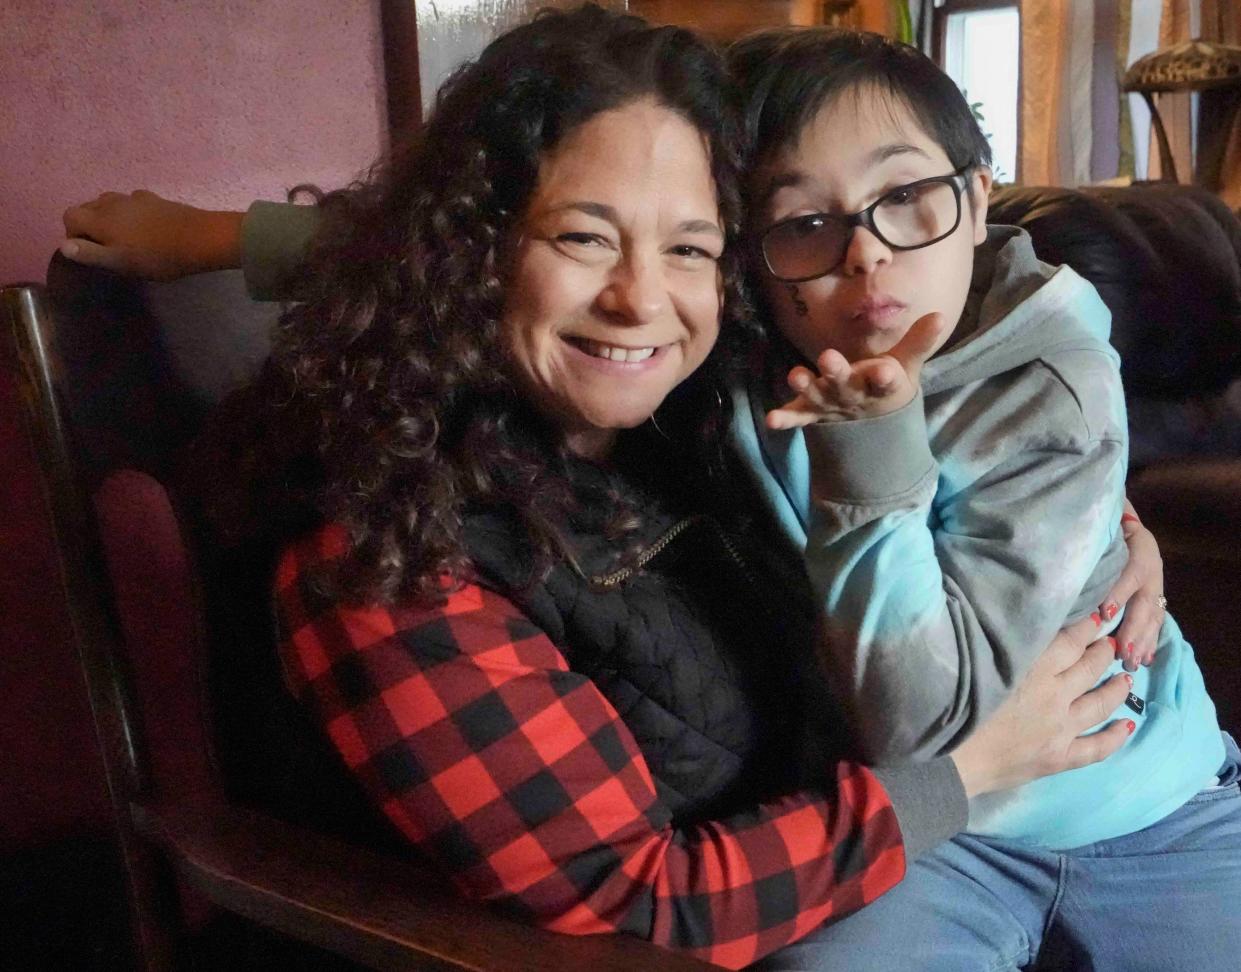 Beth Wisniewski encourages her 11-year-old son, Henry, who has Down syndrome, to use digital technology to improve his conversational skills.